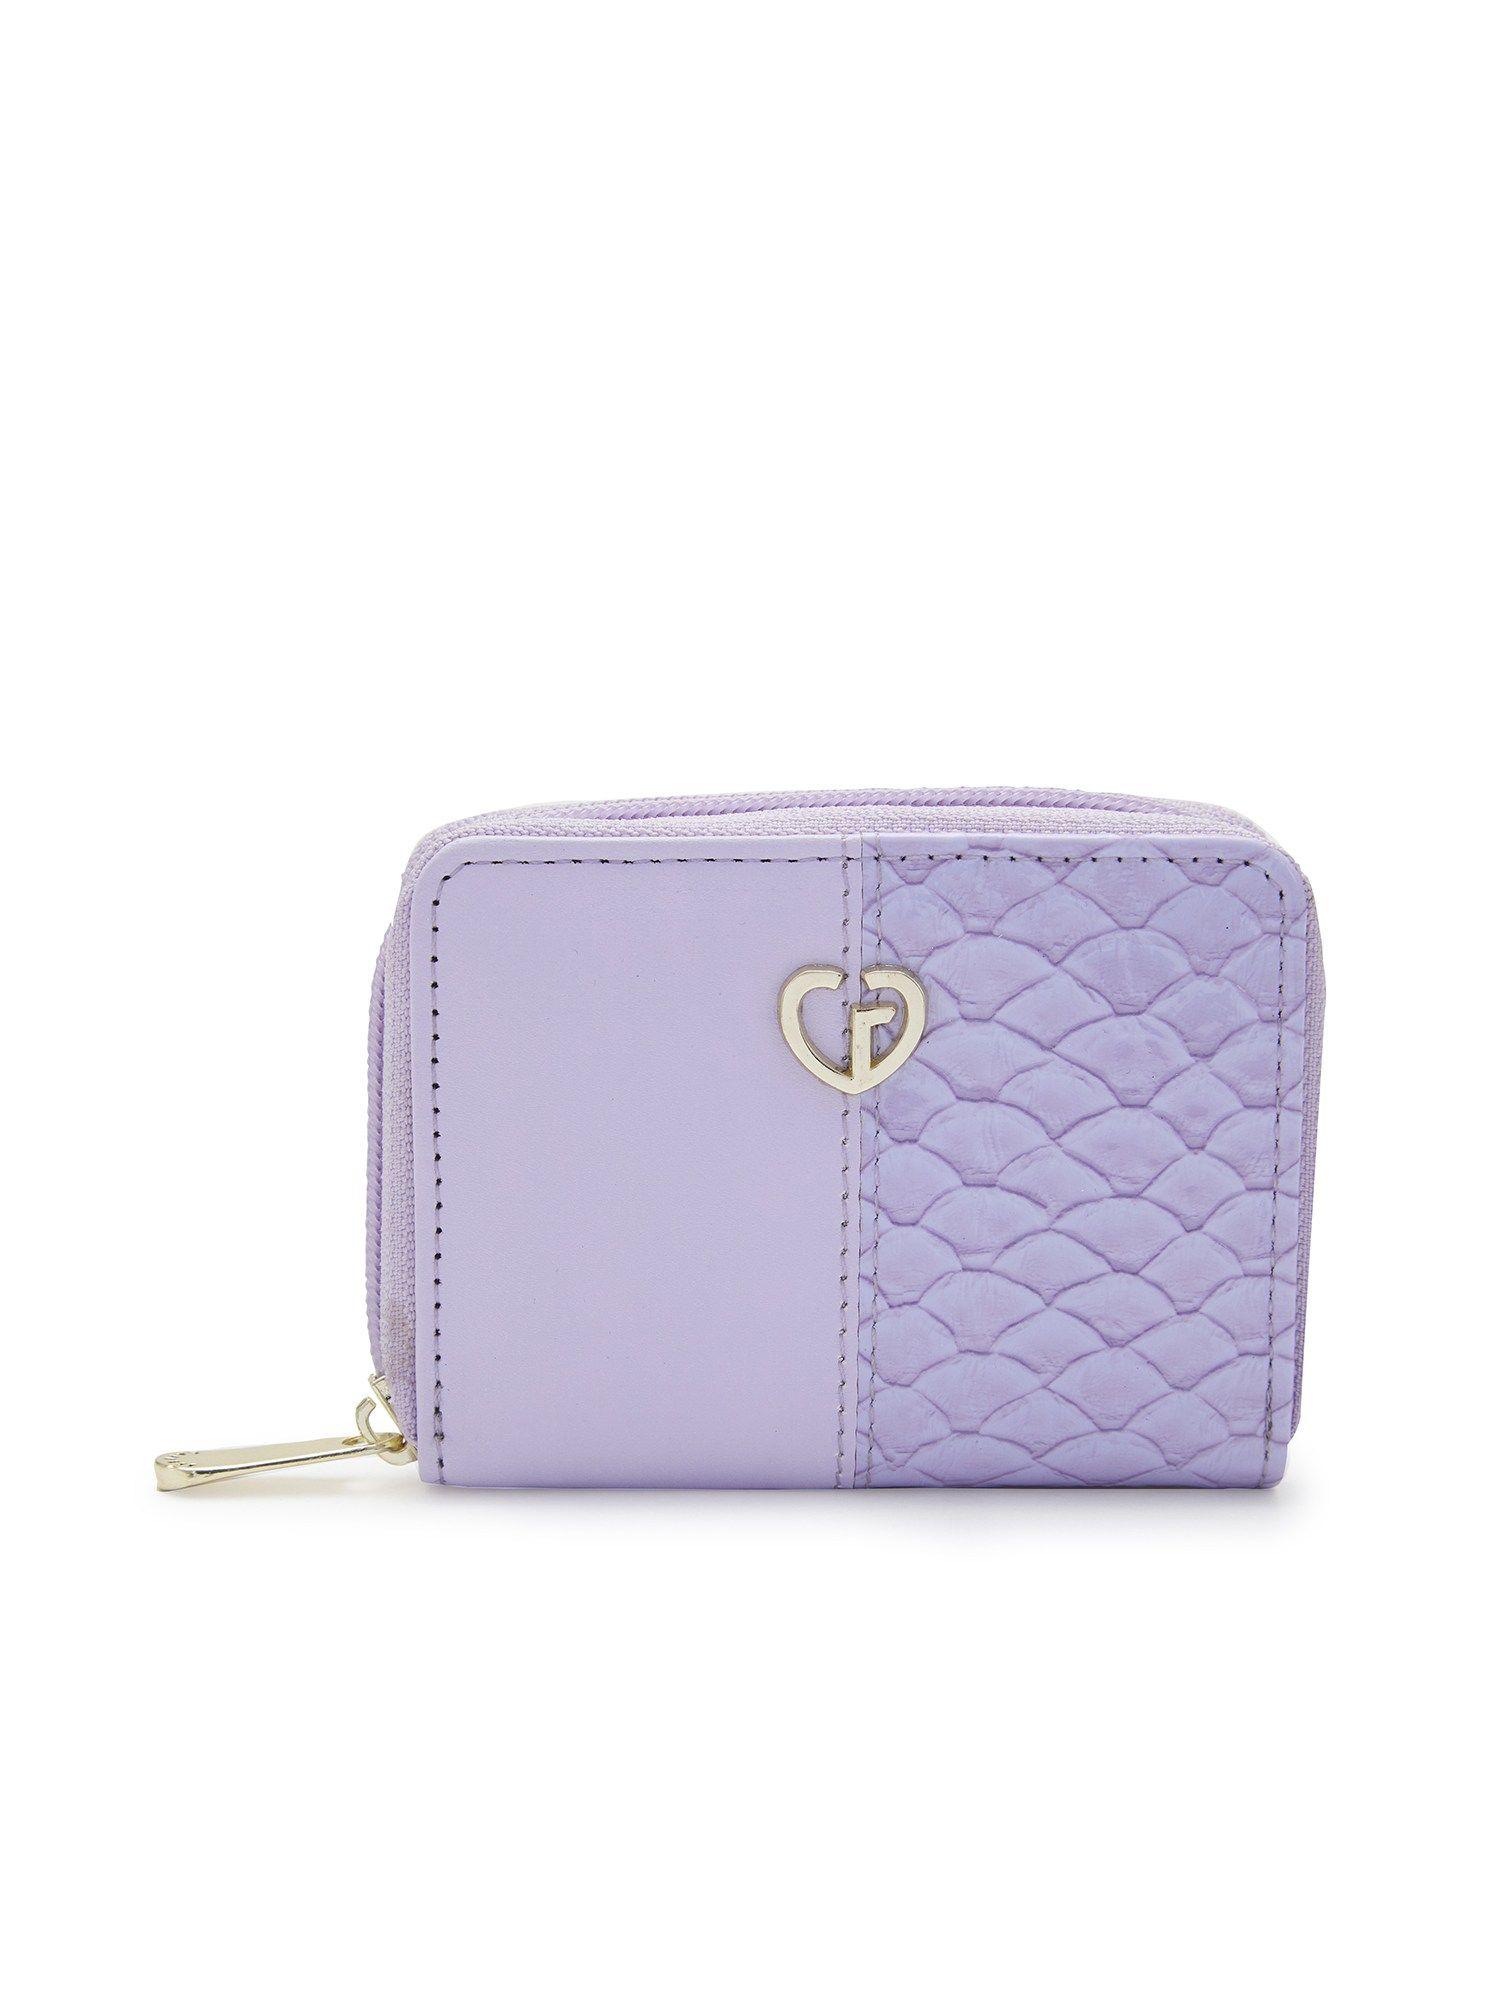 adayla small wallet lilac